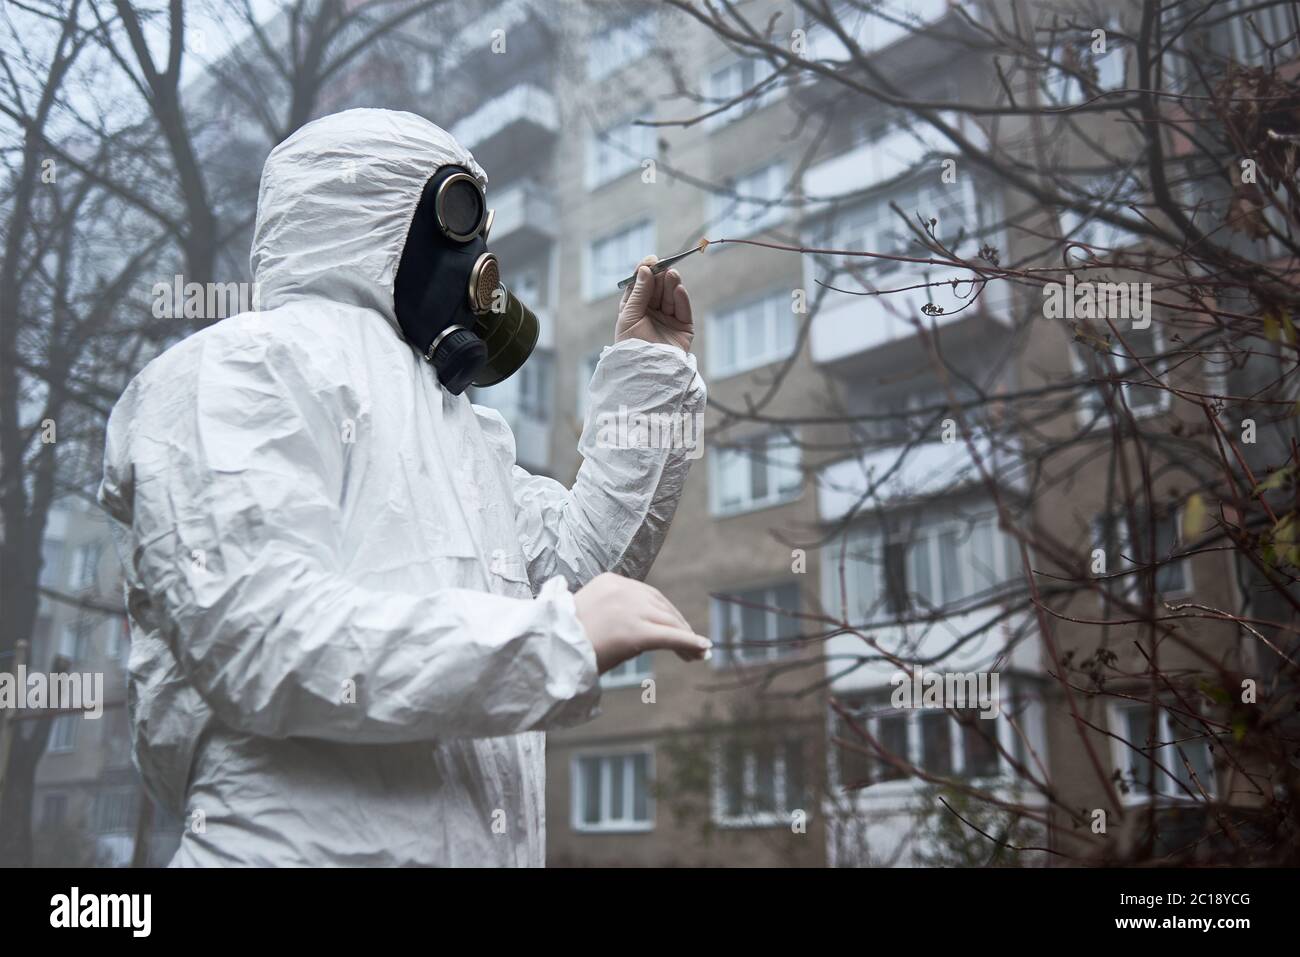 Man in gas mask and protective clothing monitoring city environment.  Scientist checking tree leaves, taking piece using tweezers for analysis.  Environmental disaster, smoky empty atmosphere in yard Stock Photo - Alamy